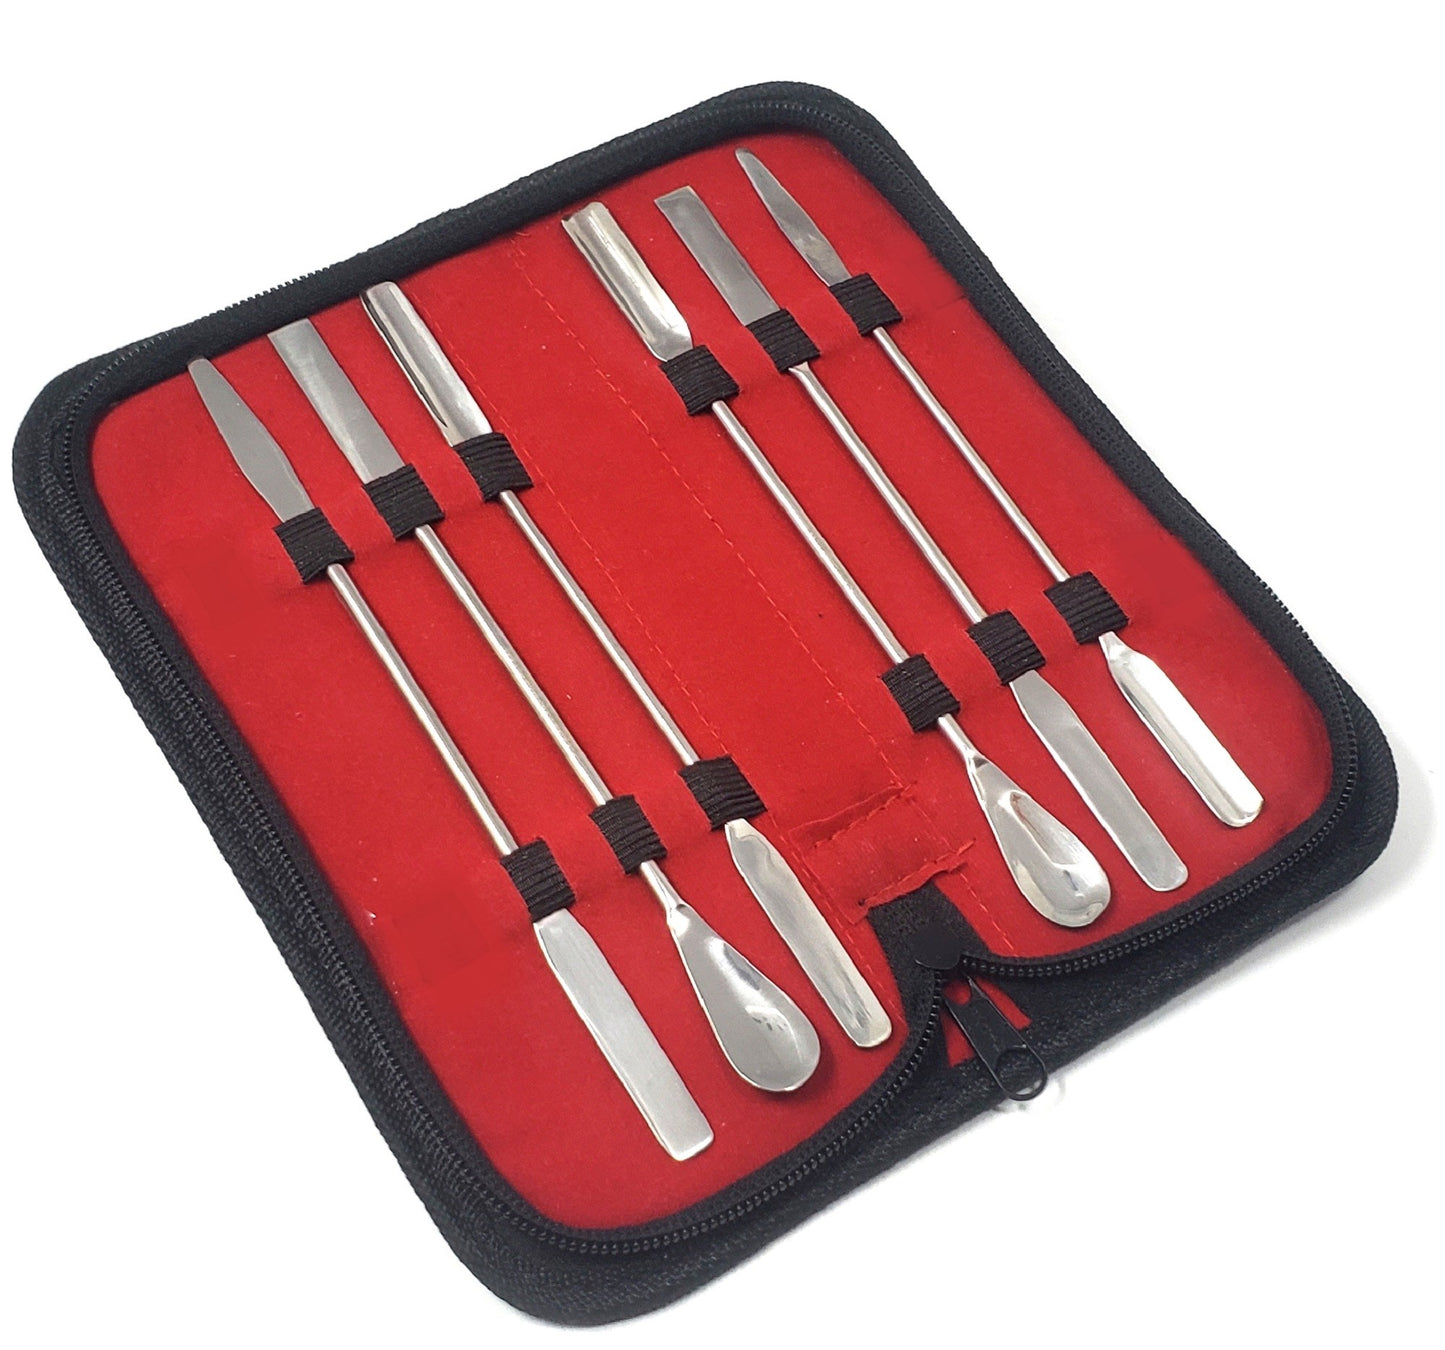 Stainless Steel Lab Spatula Set in a Carrying Case - 6 Pcs Edition